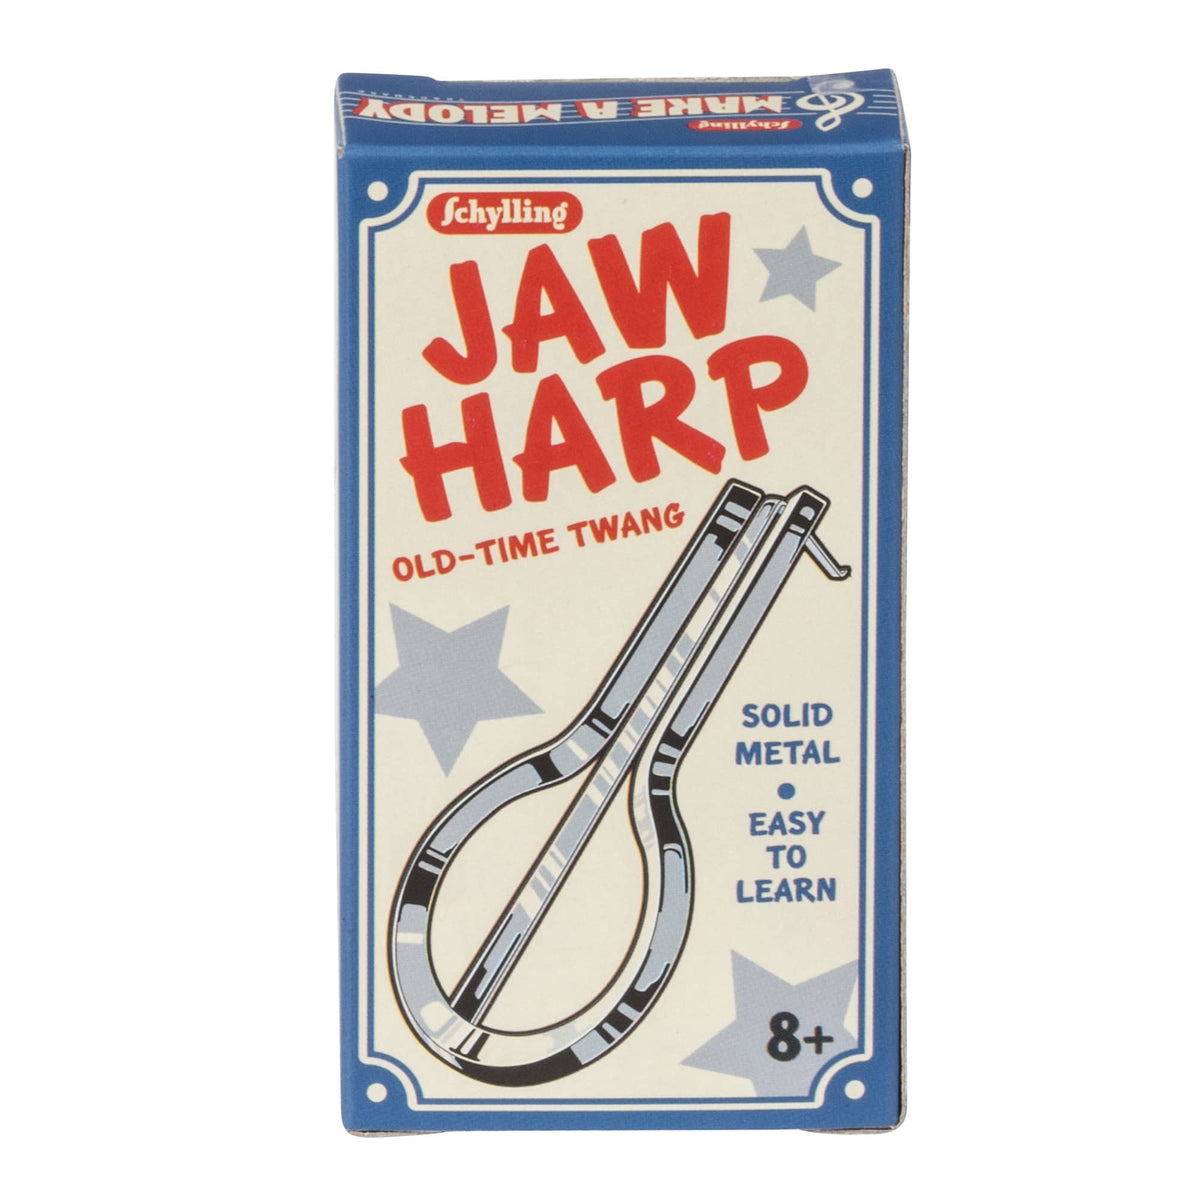 Front view of Jaw Harp in package.